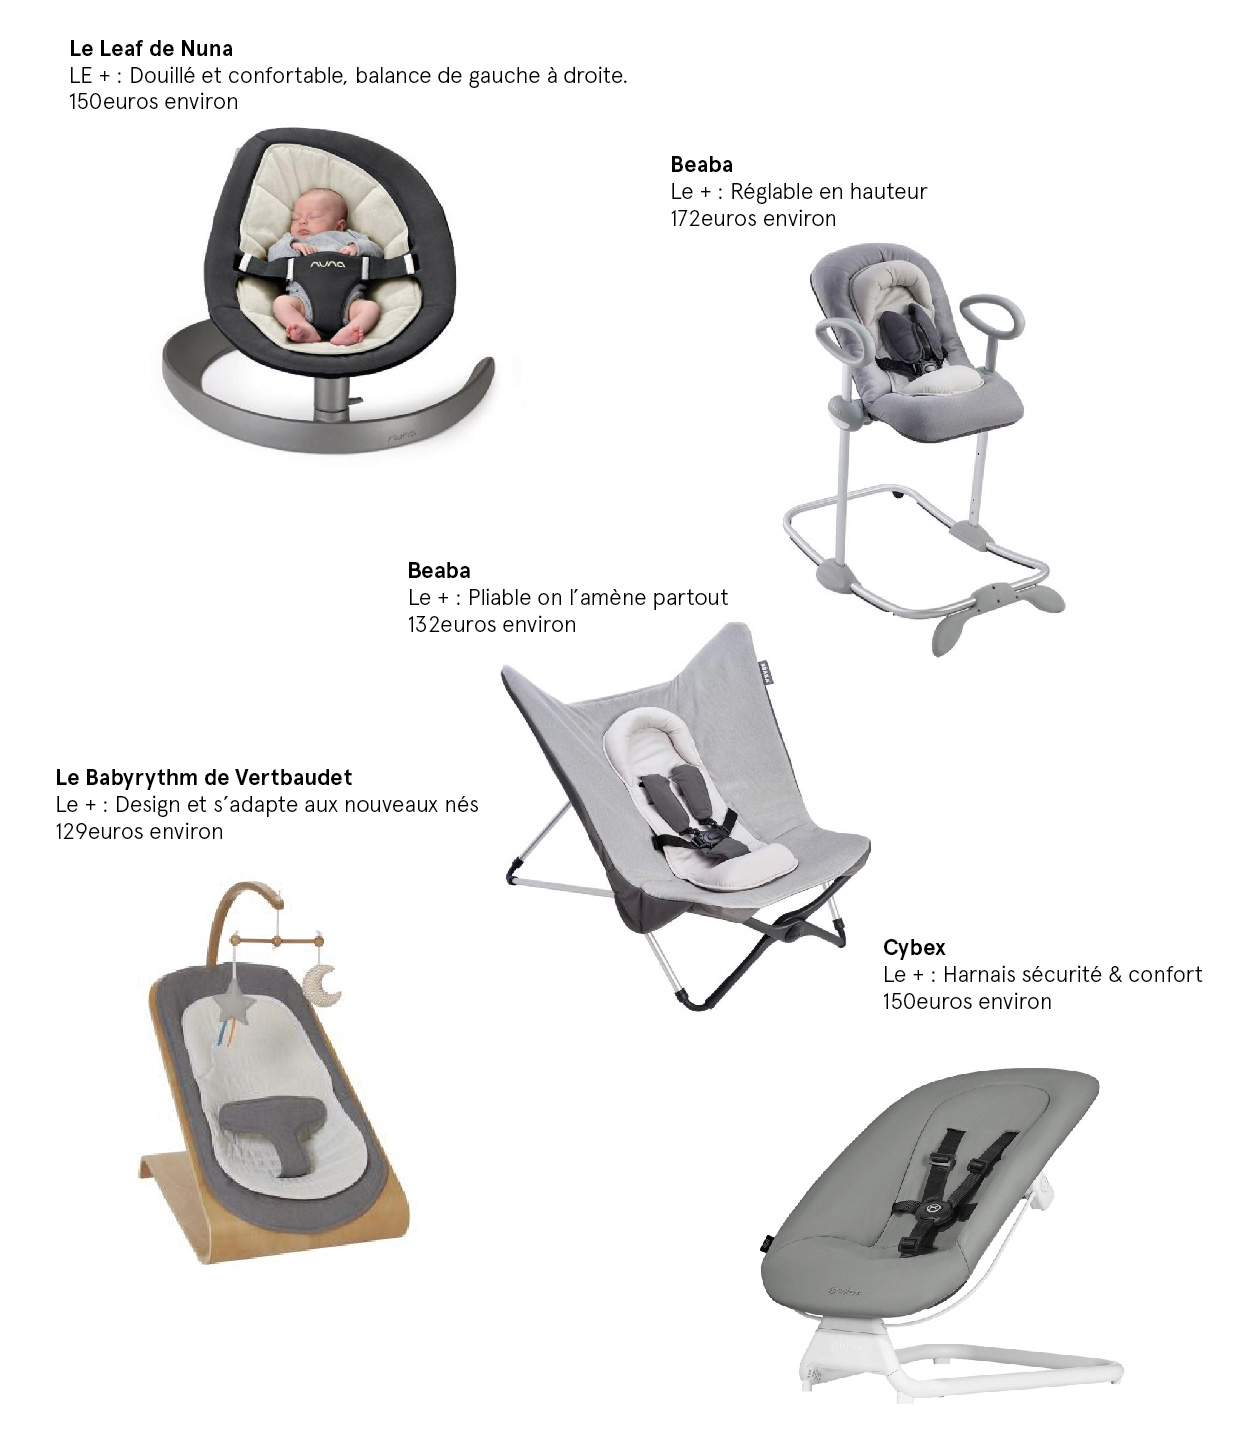 The deckchair: the equipment that benefits parents and especially babies